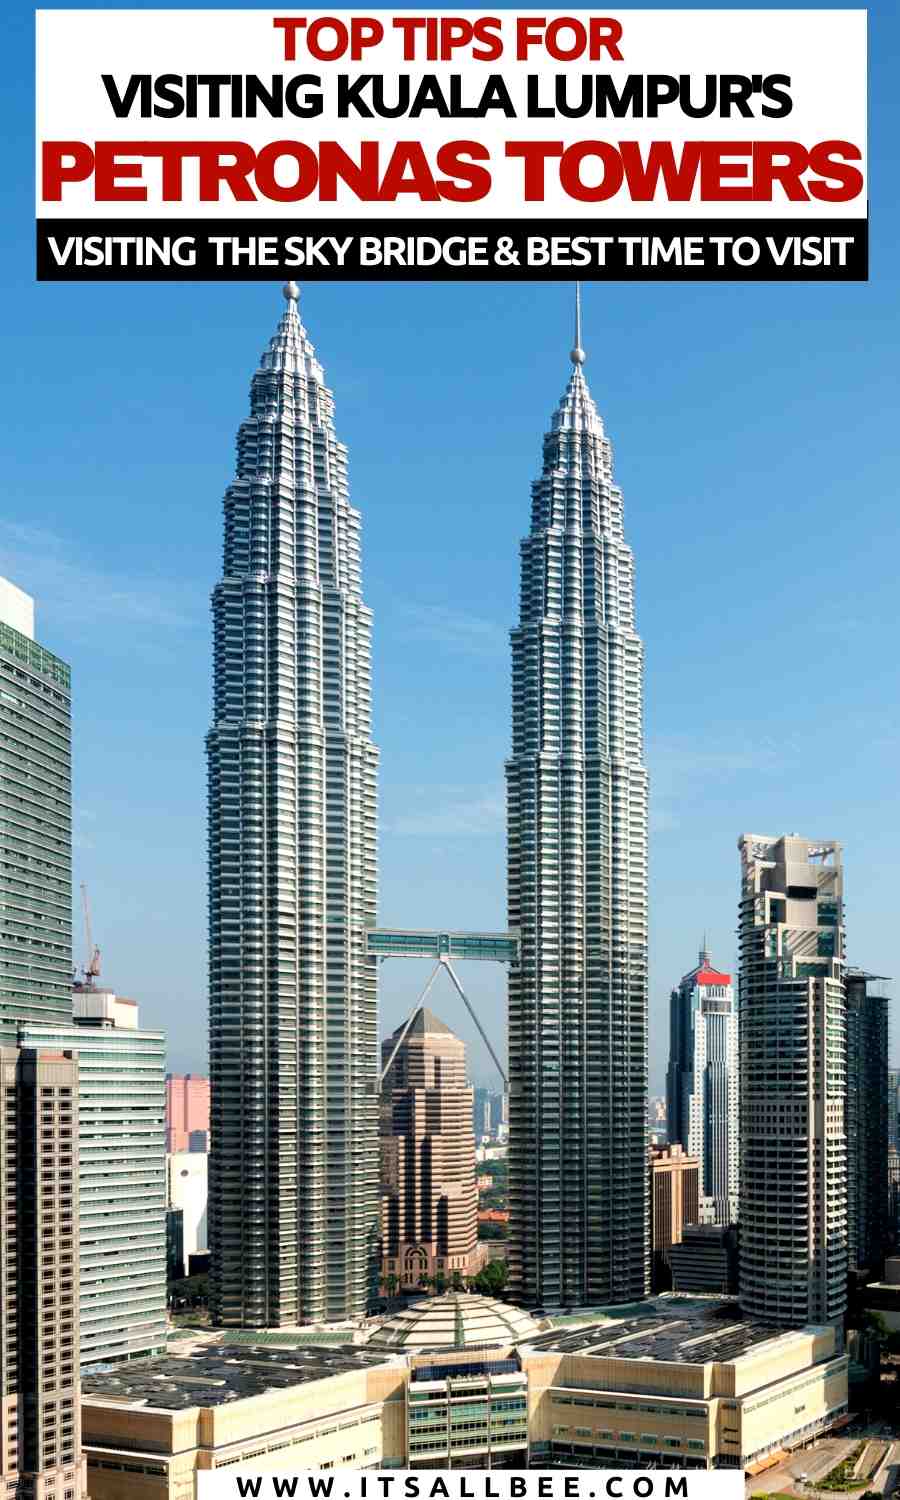 Tips for visiting the petronas towers in KL